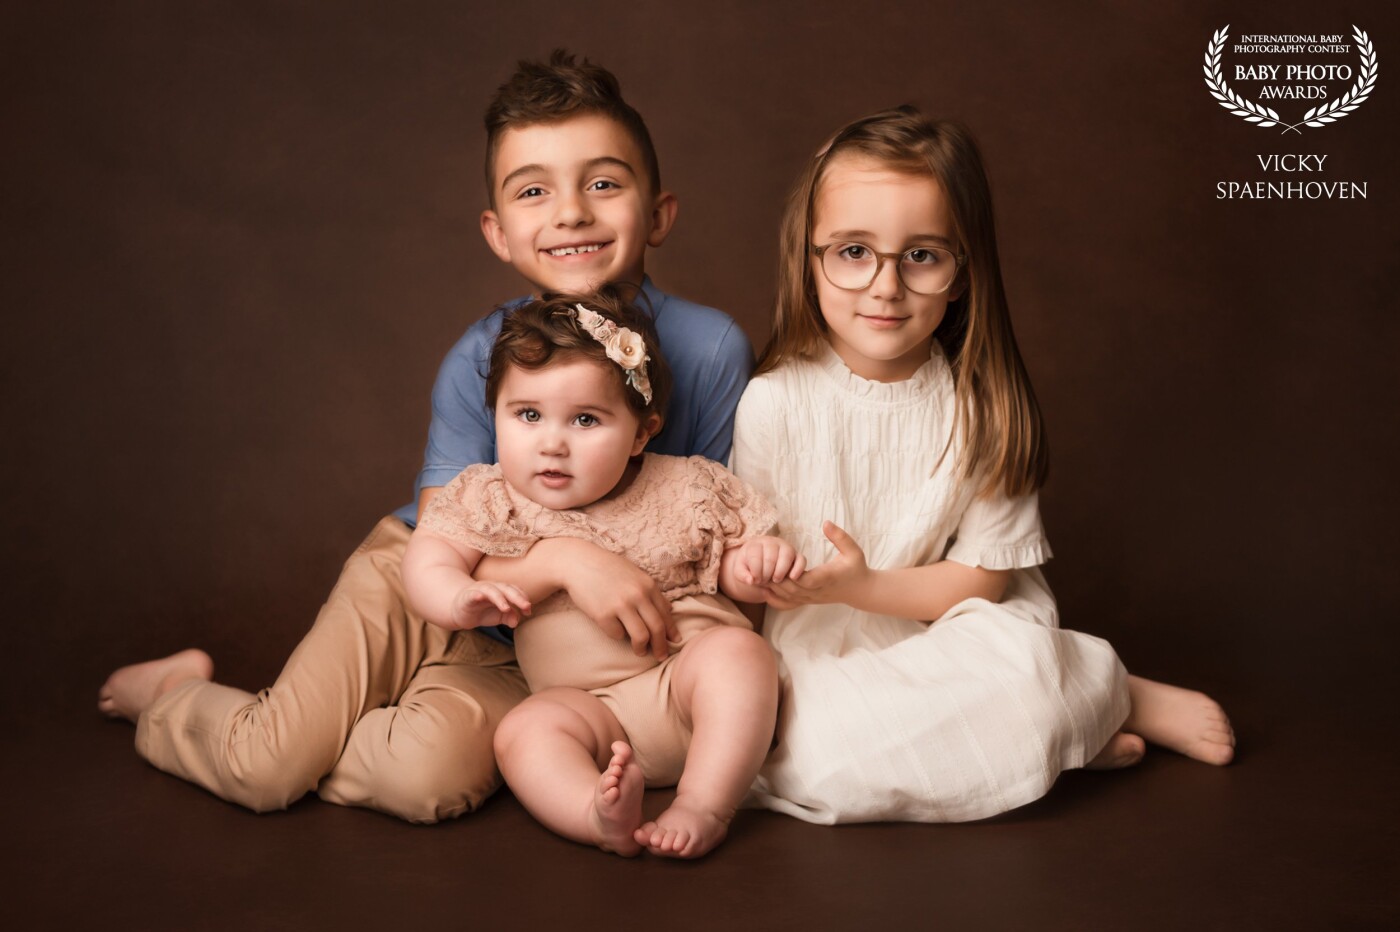 This beautiful boy has brought his two lovely sisters with him for a timeless portrait. I absolutely love the warm tones in this picture and the beautiful connection between the kids.